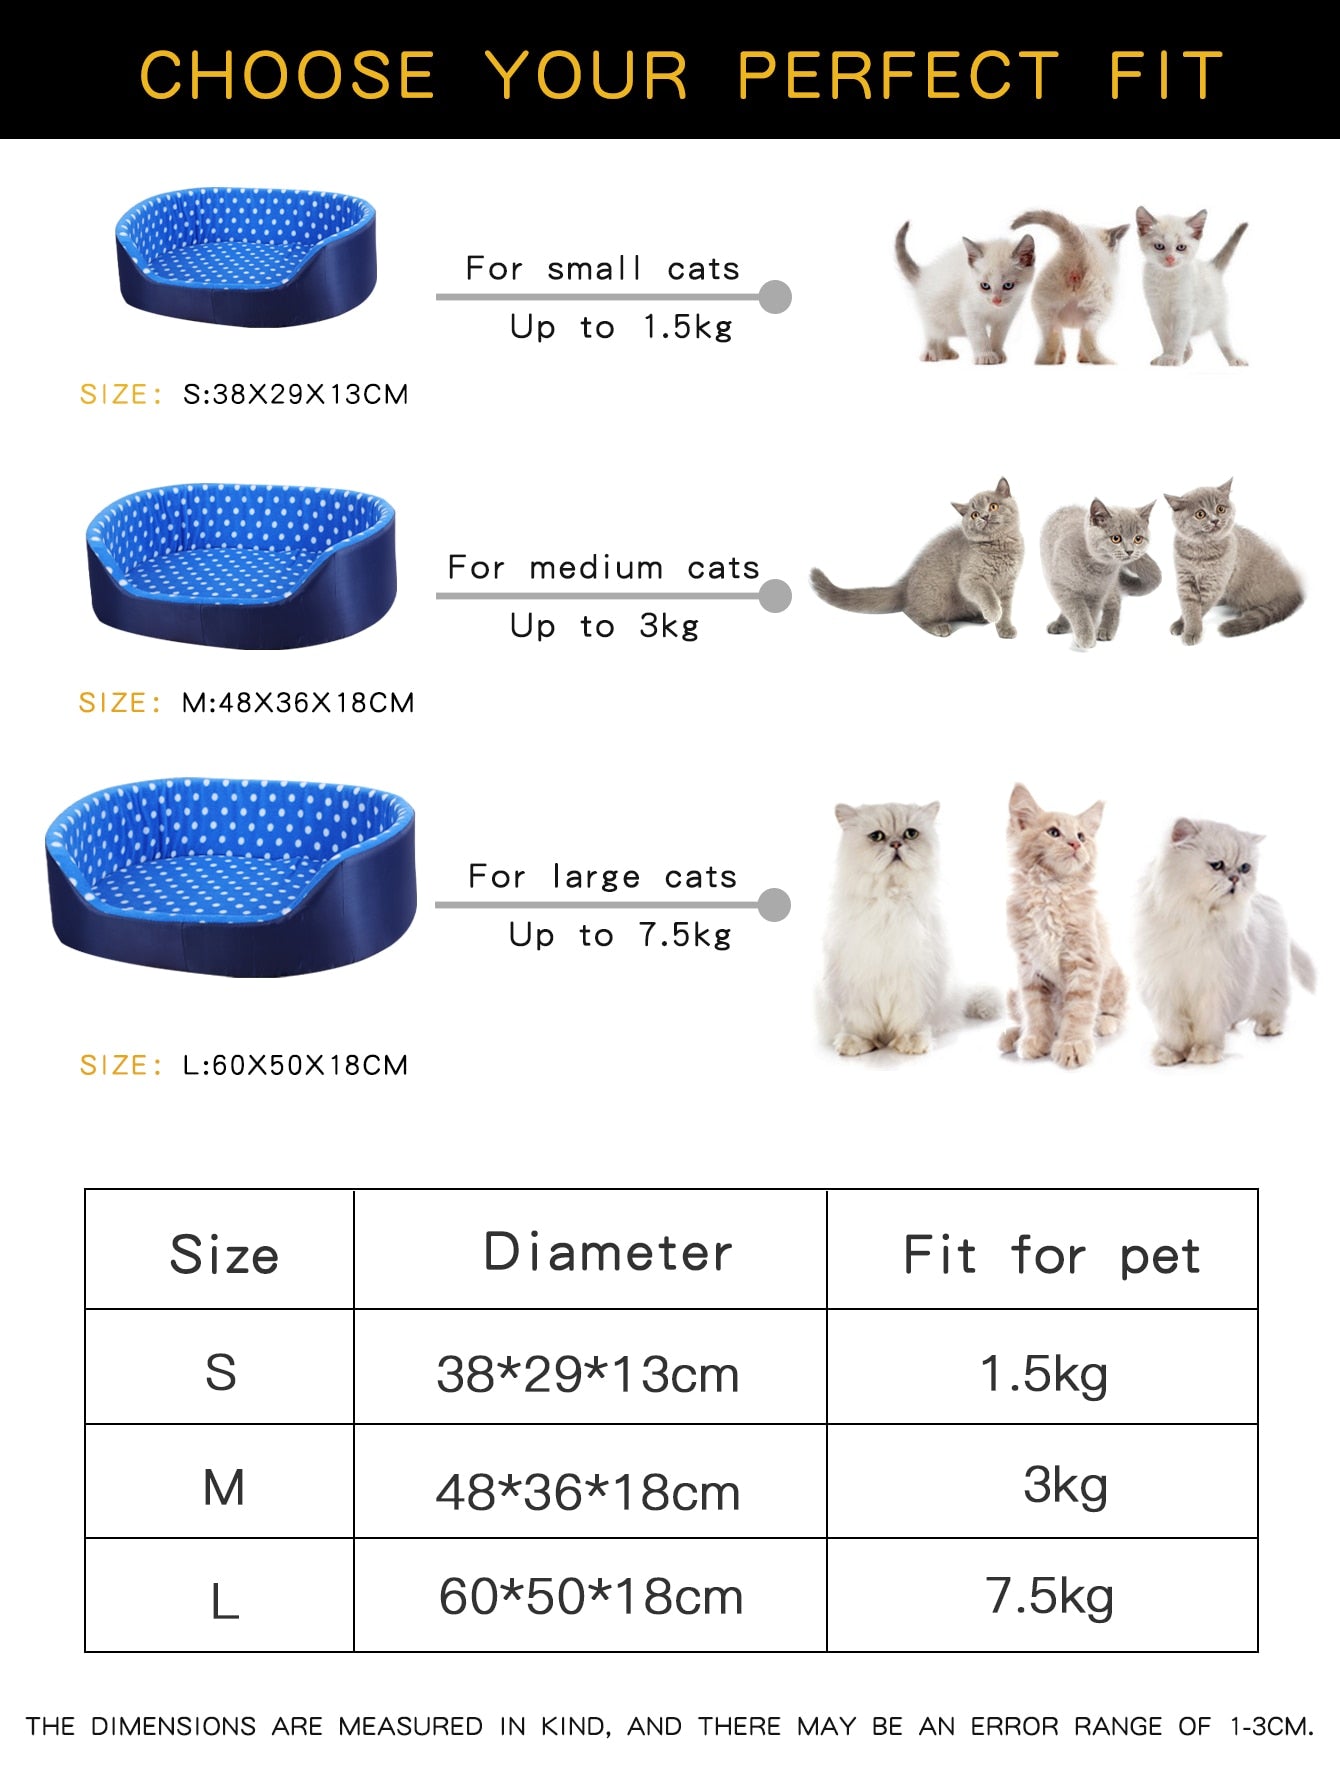 Cat Bed Pet Mat Products for Cats Sofa Comfort Dogs Accessories House Portable Pillow Sleeping Supplies Cushion Kitten Beds Mats